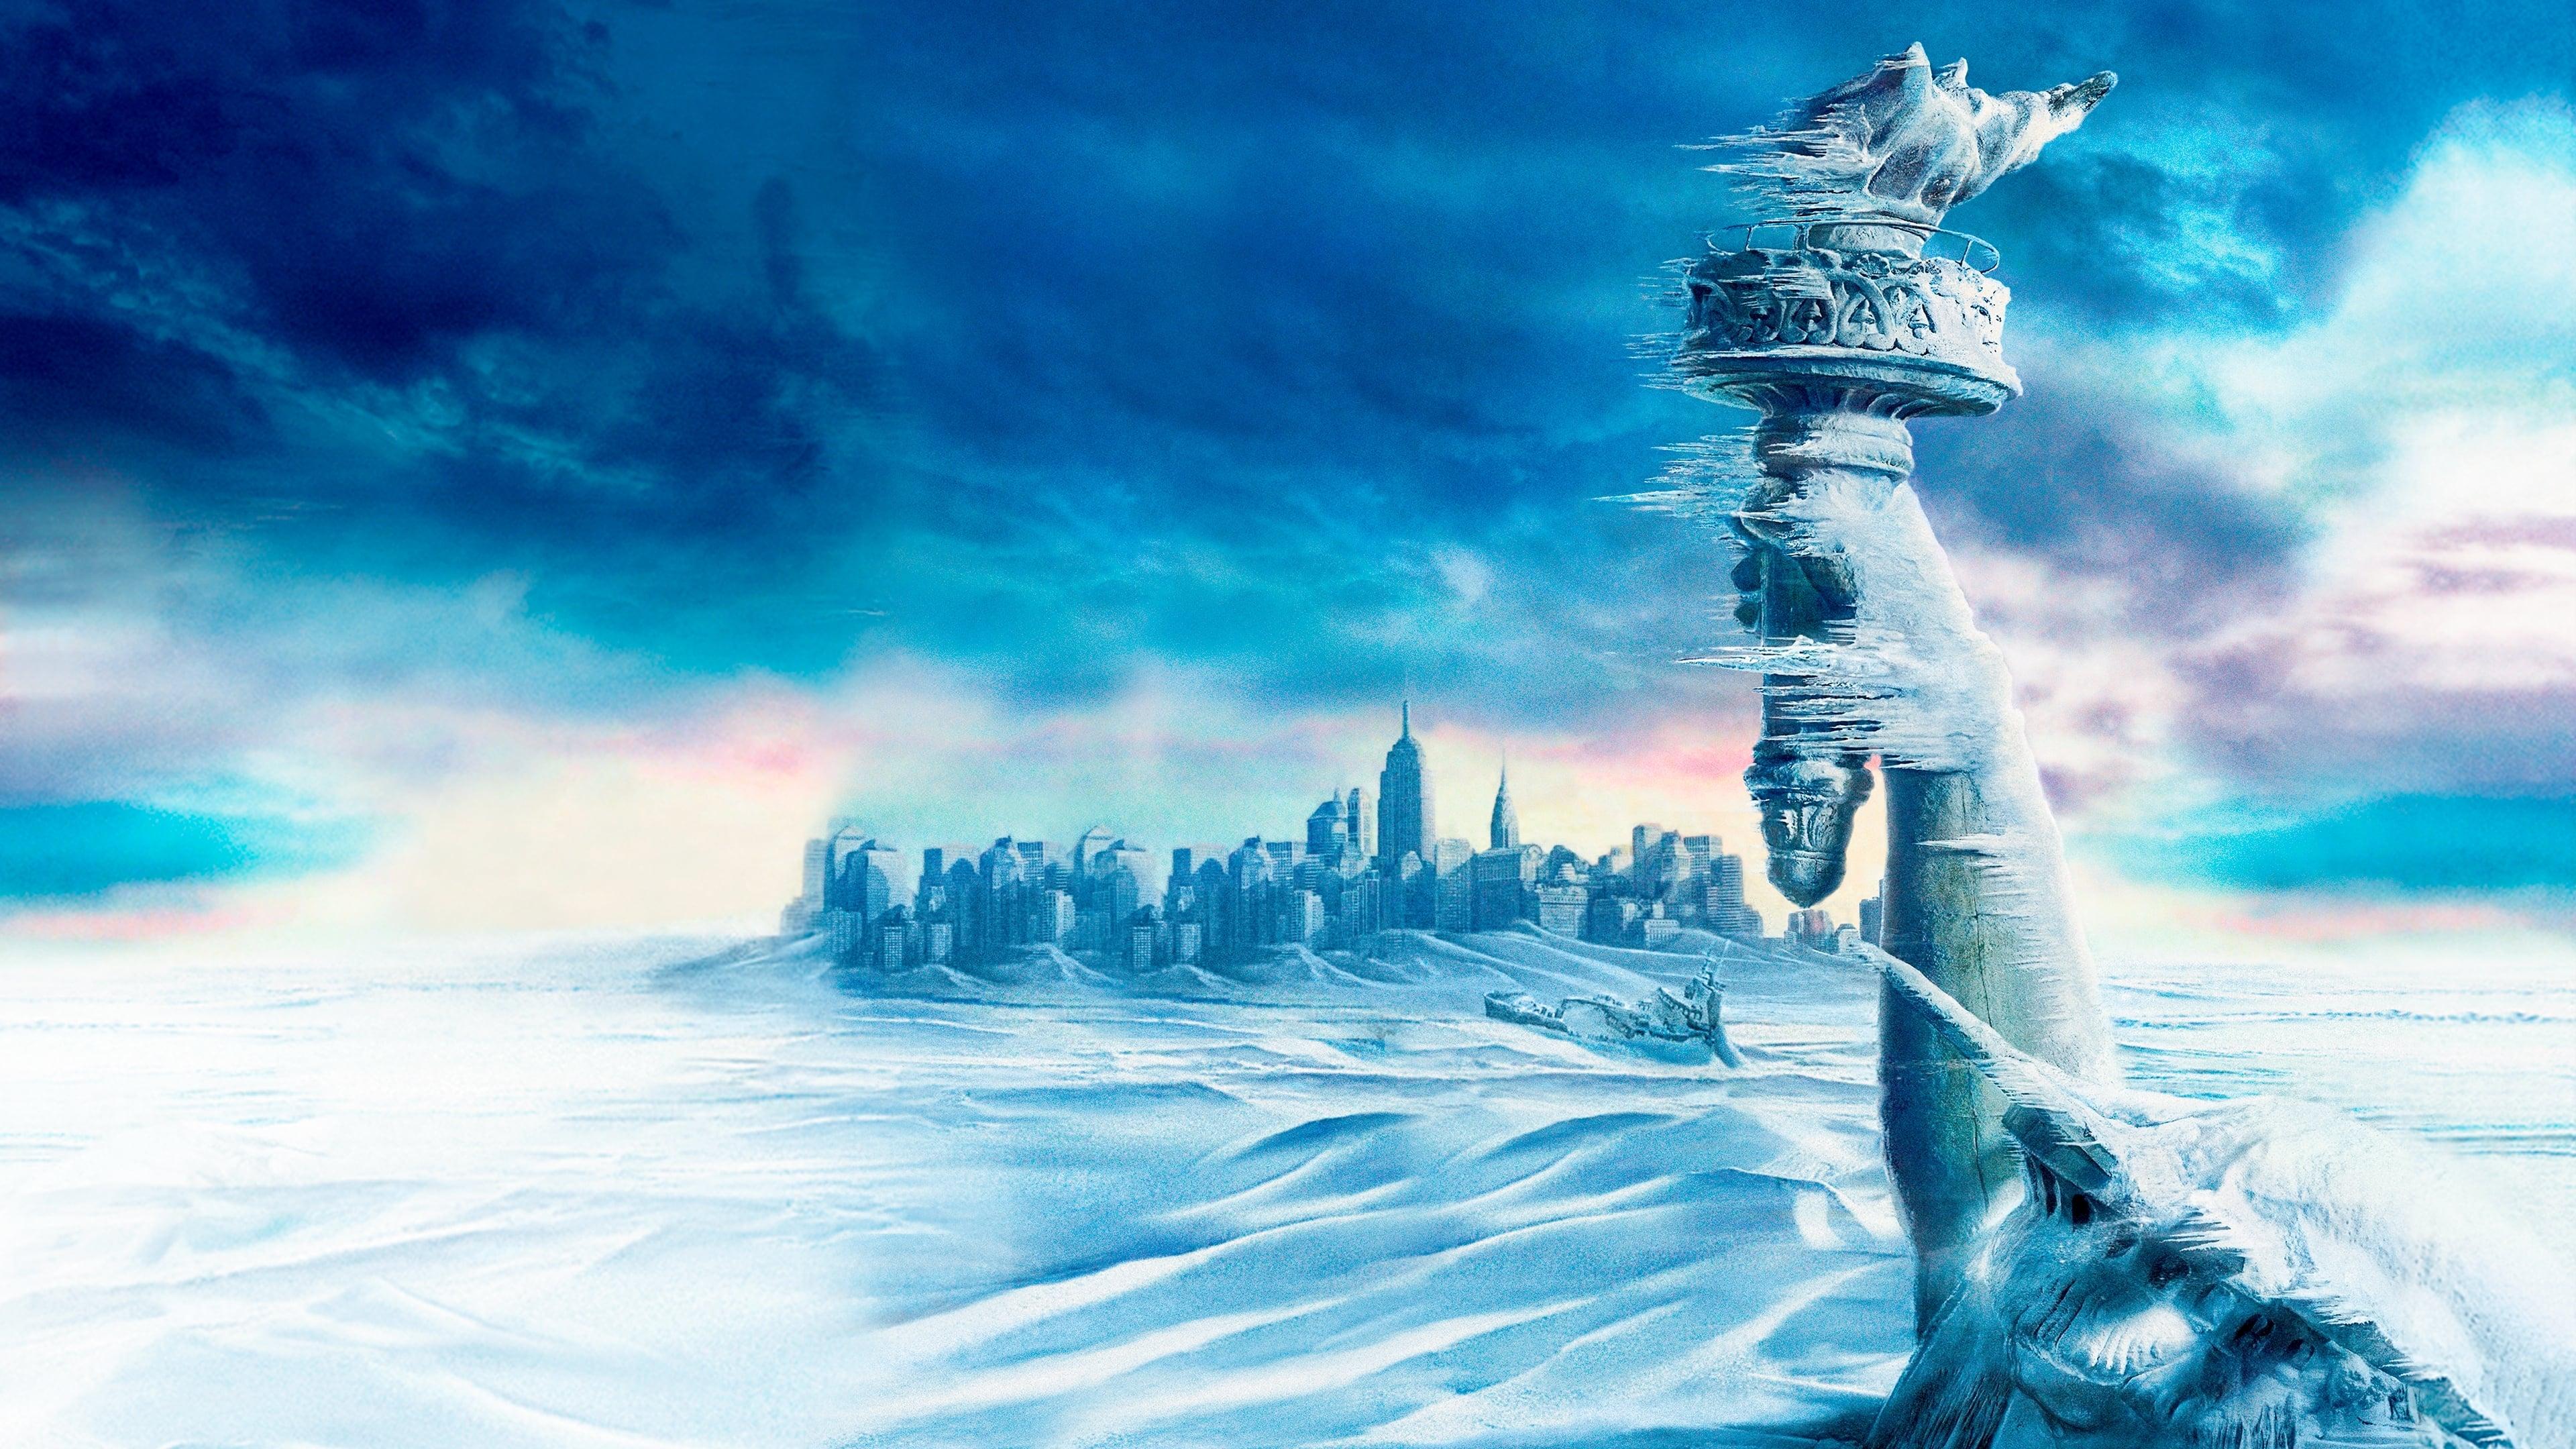 The Day After Tomorrow backdrop